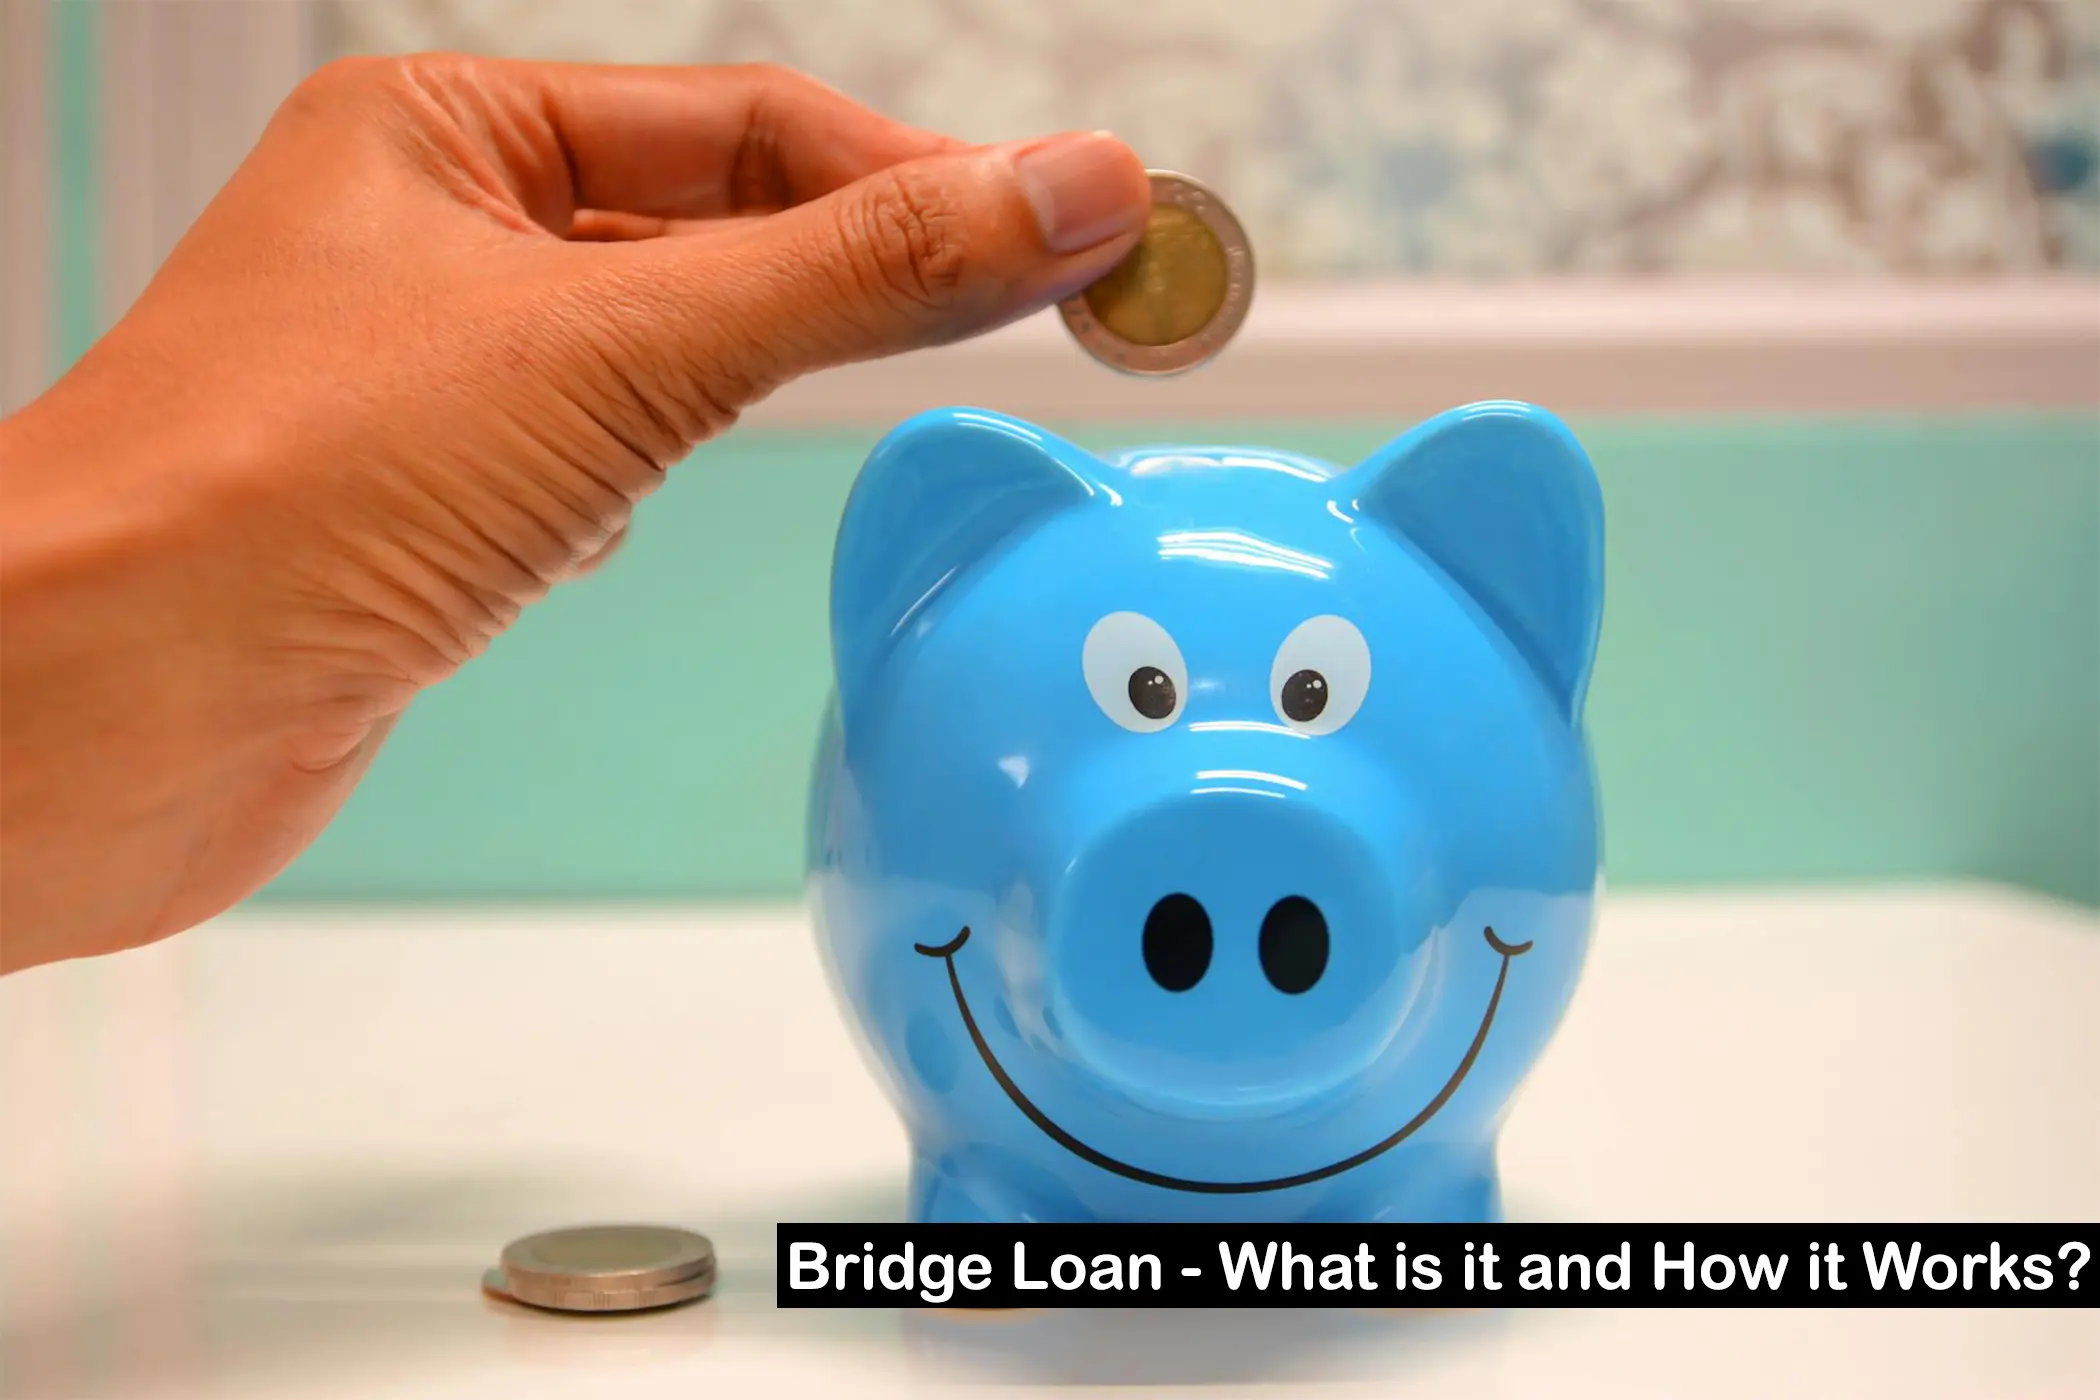 Bridge Loan - What is it and How it Works?